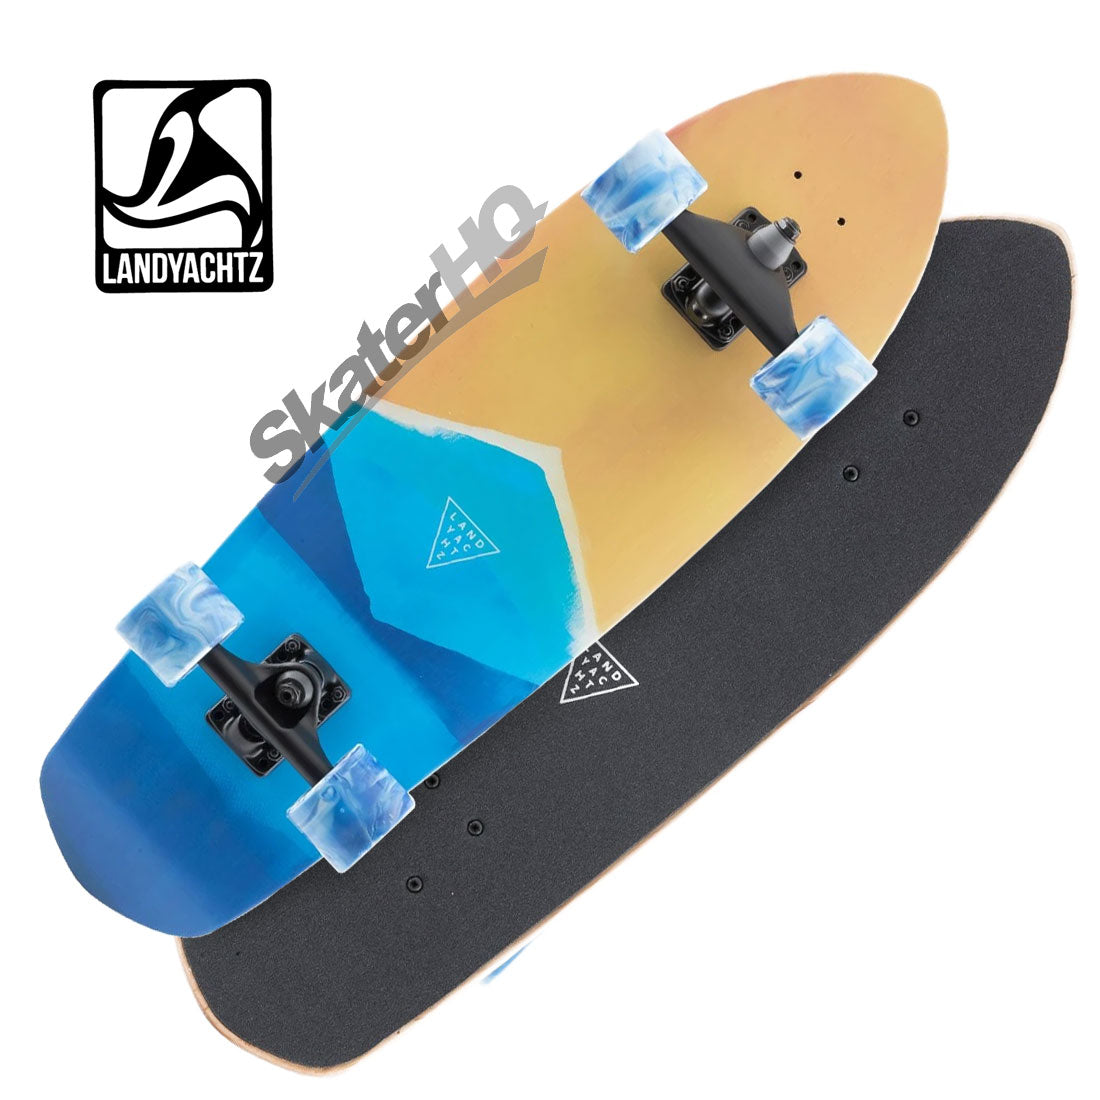 Landyachtz Pocket Knife 29 Surfskate Complete - Watercolour Skateboard Compl Carving and Specialty